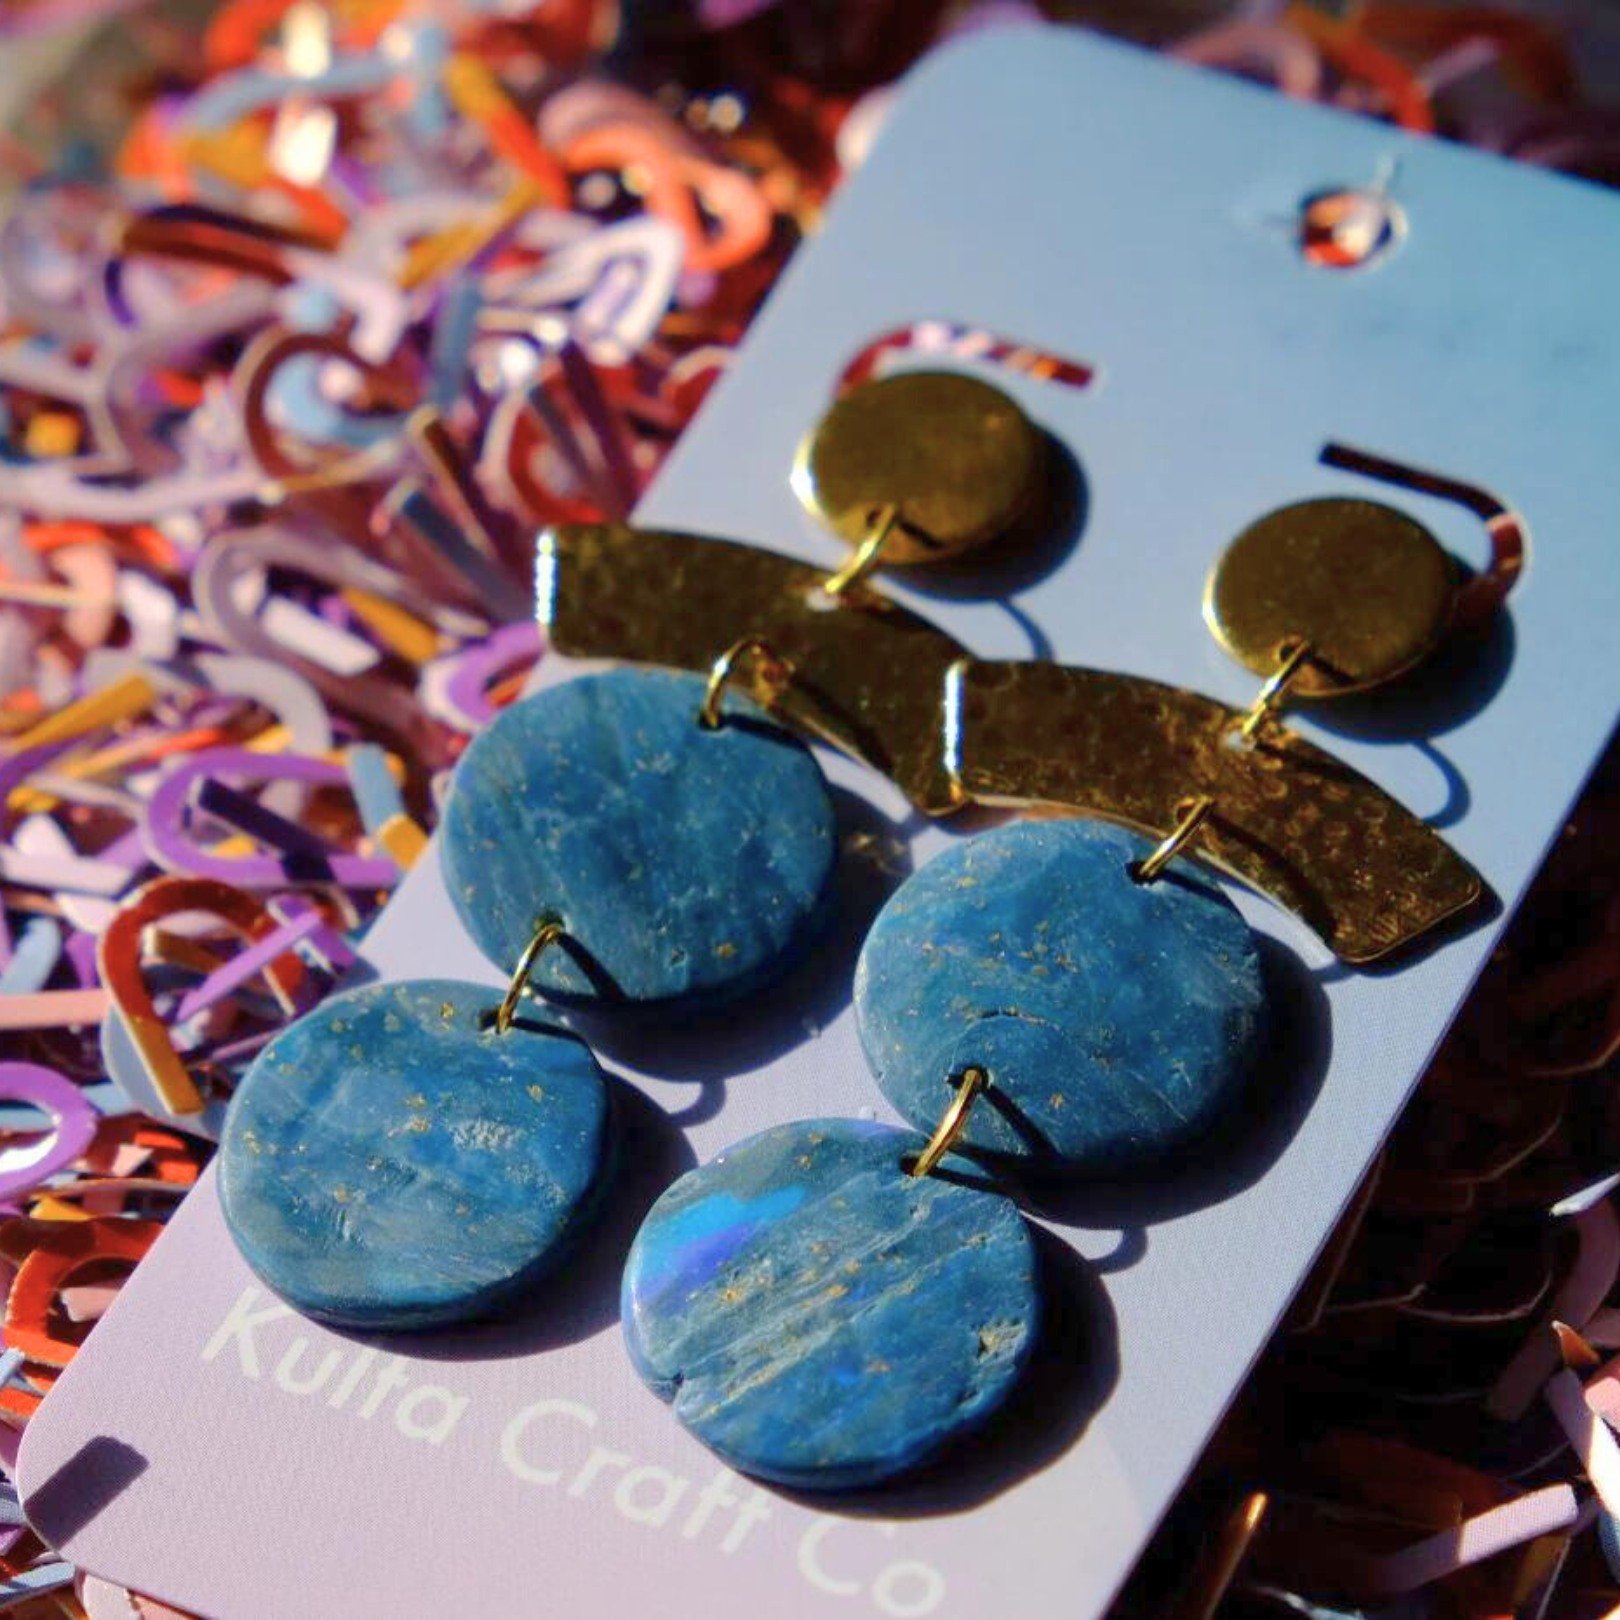 We can't wait to shop all of @kultacraftco's amazing handcrafted jewelry and home goods at Celebrate Petworth! We are delighted they're joining us for our 10th annual neighborhood festival 🎉

#shopsmalldc #madeindc #celebratepetworth #petworthdc #ha